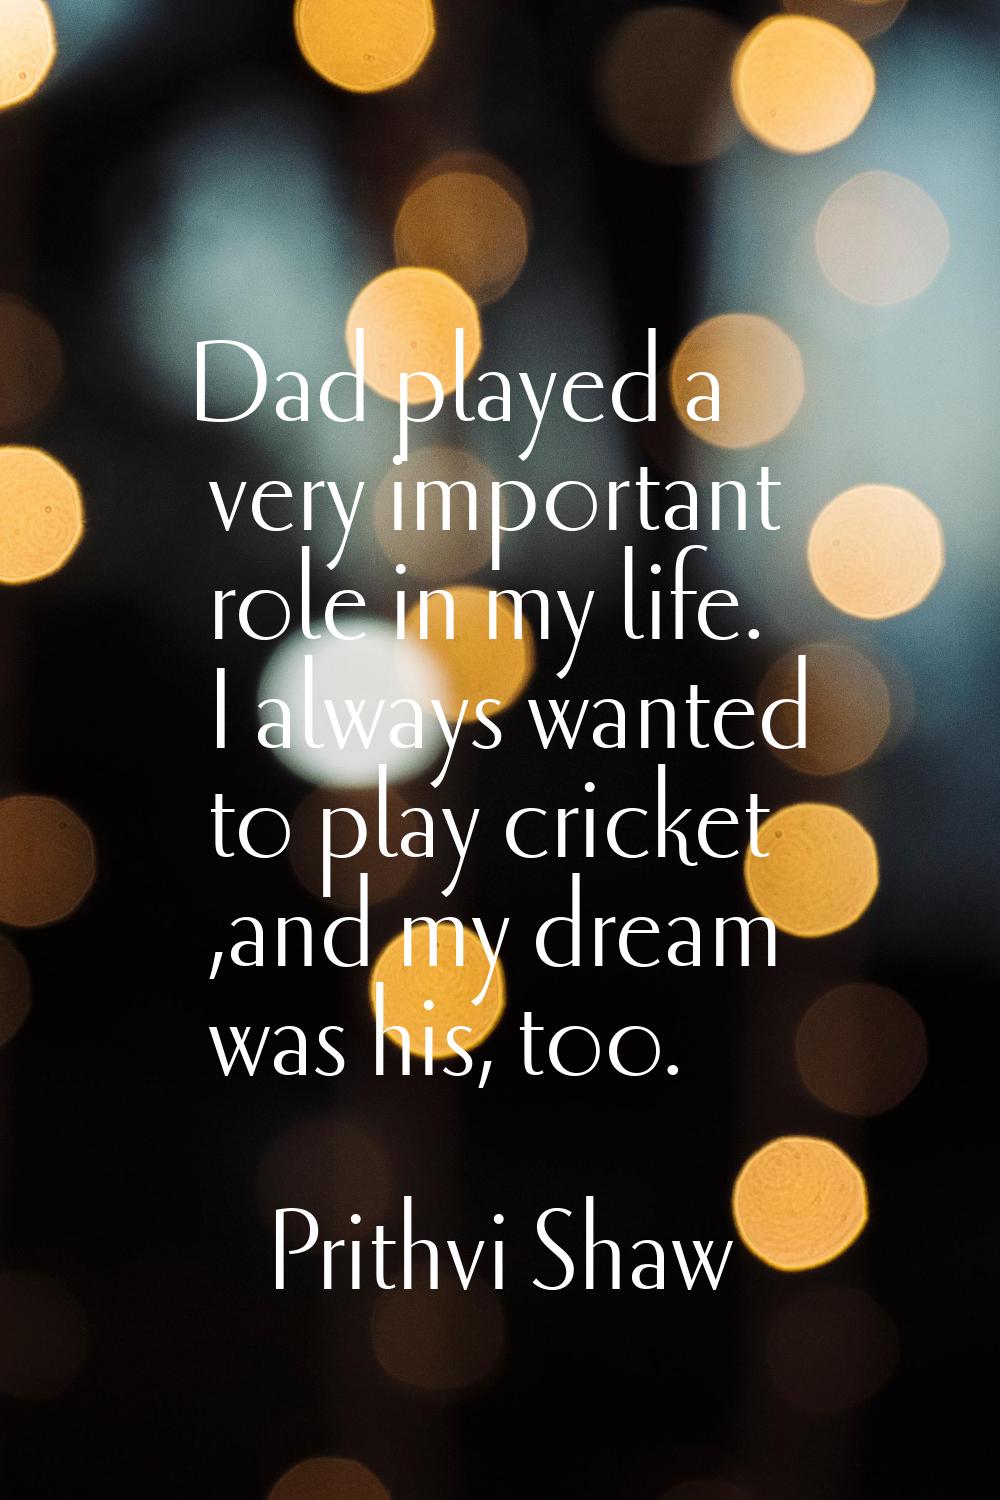 Dad played a very important role in my life. I always wanted to play cricket ,and my dream was his,